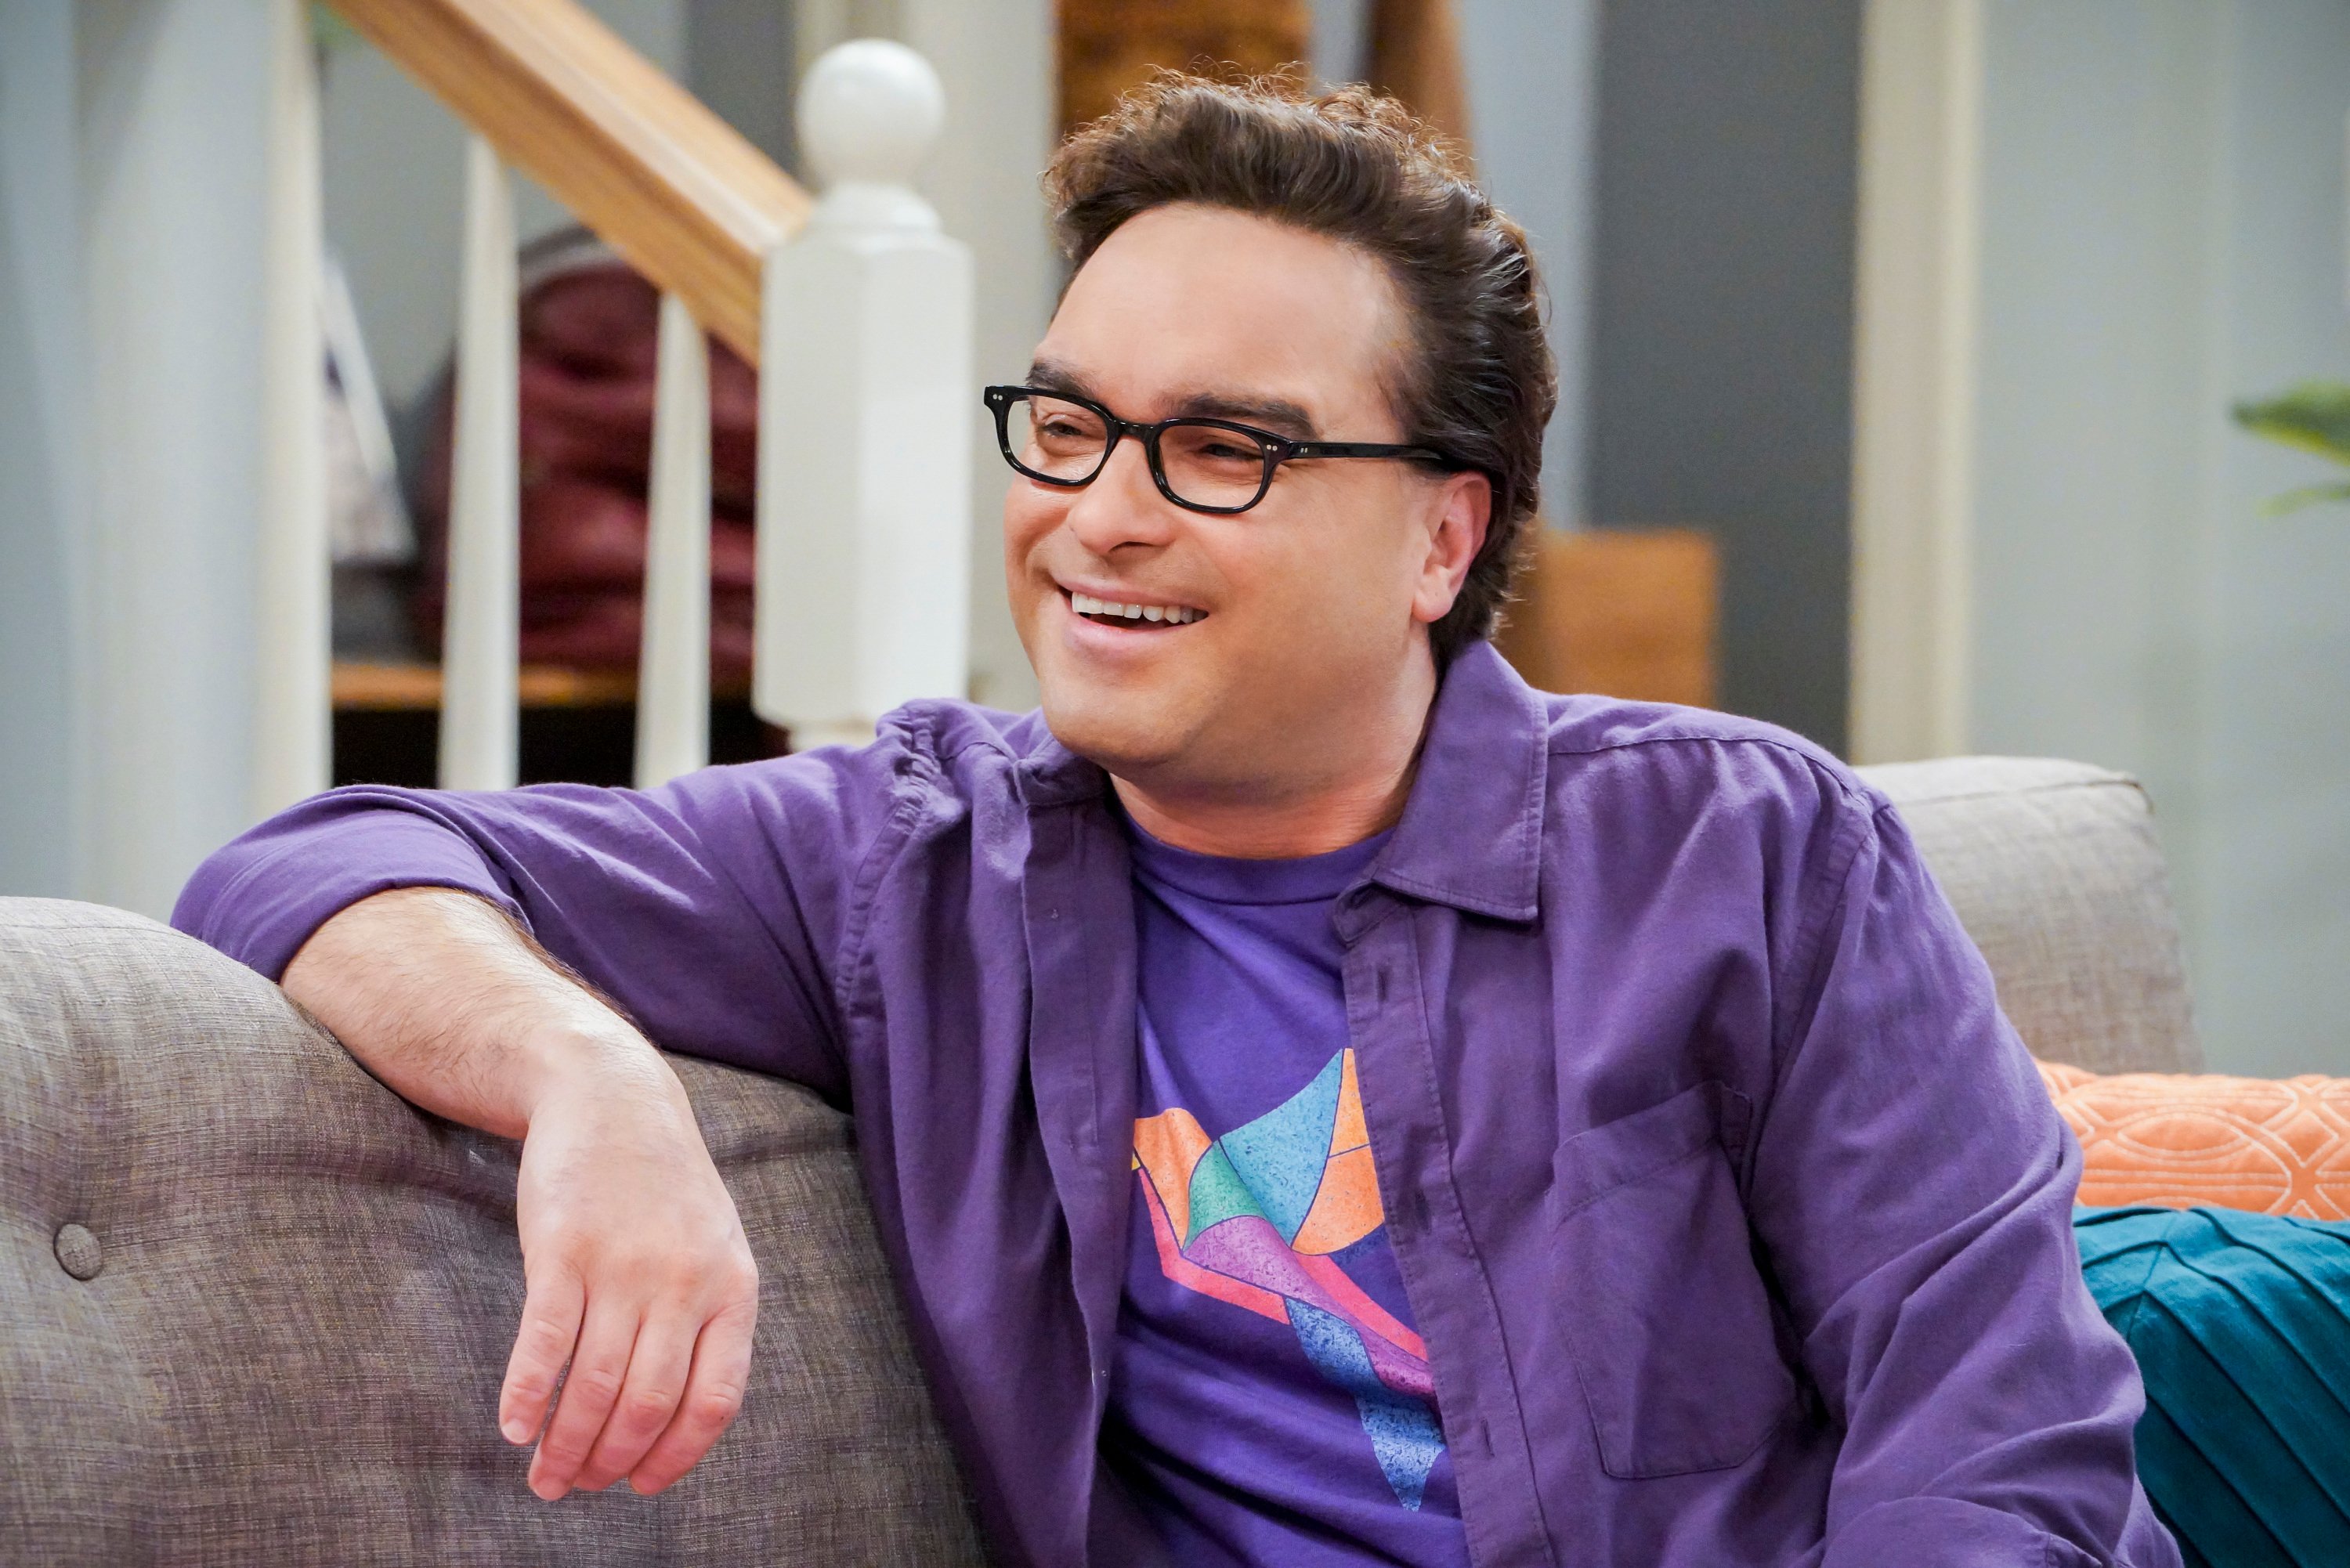 The 1 Totally Unappealing Way Leonard Hofstadter of ‘The Big Bang Theory’  is Just Like Ross Geller from ‘Friends’